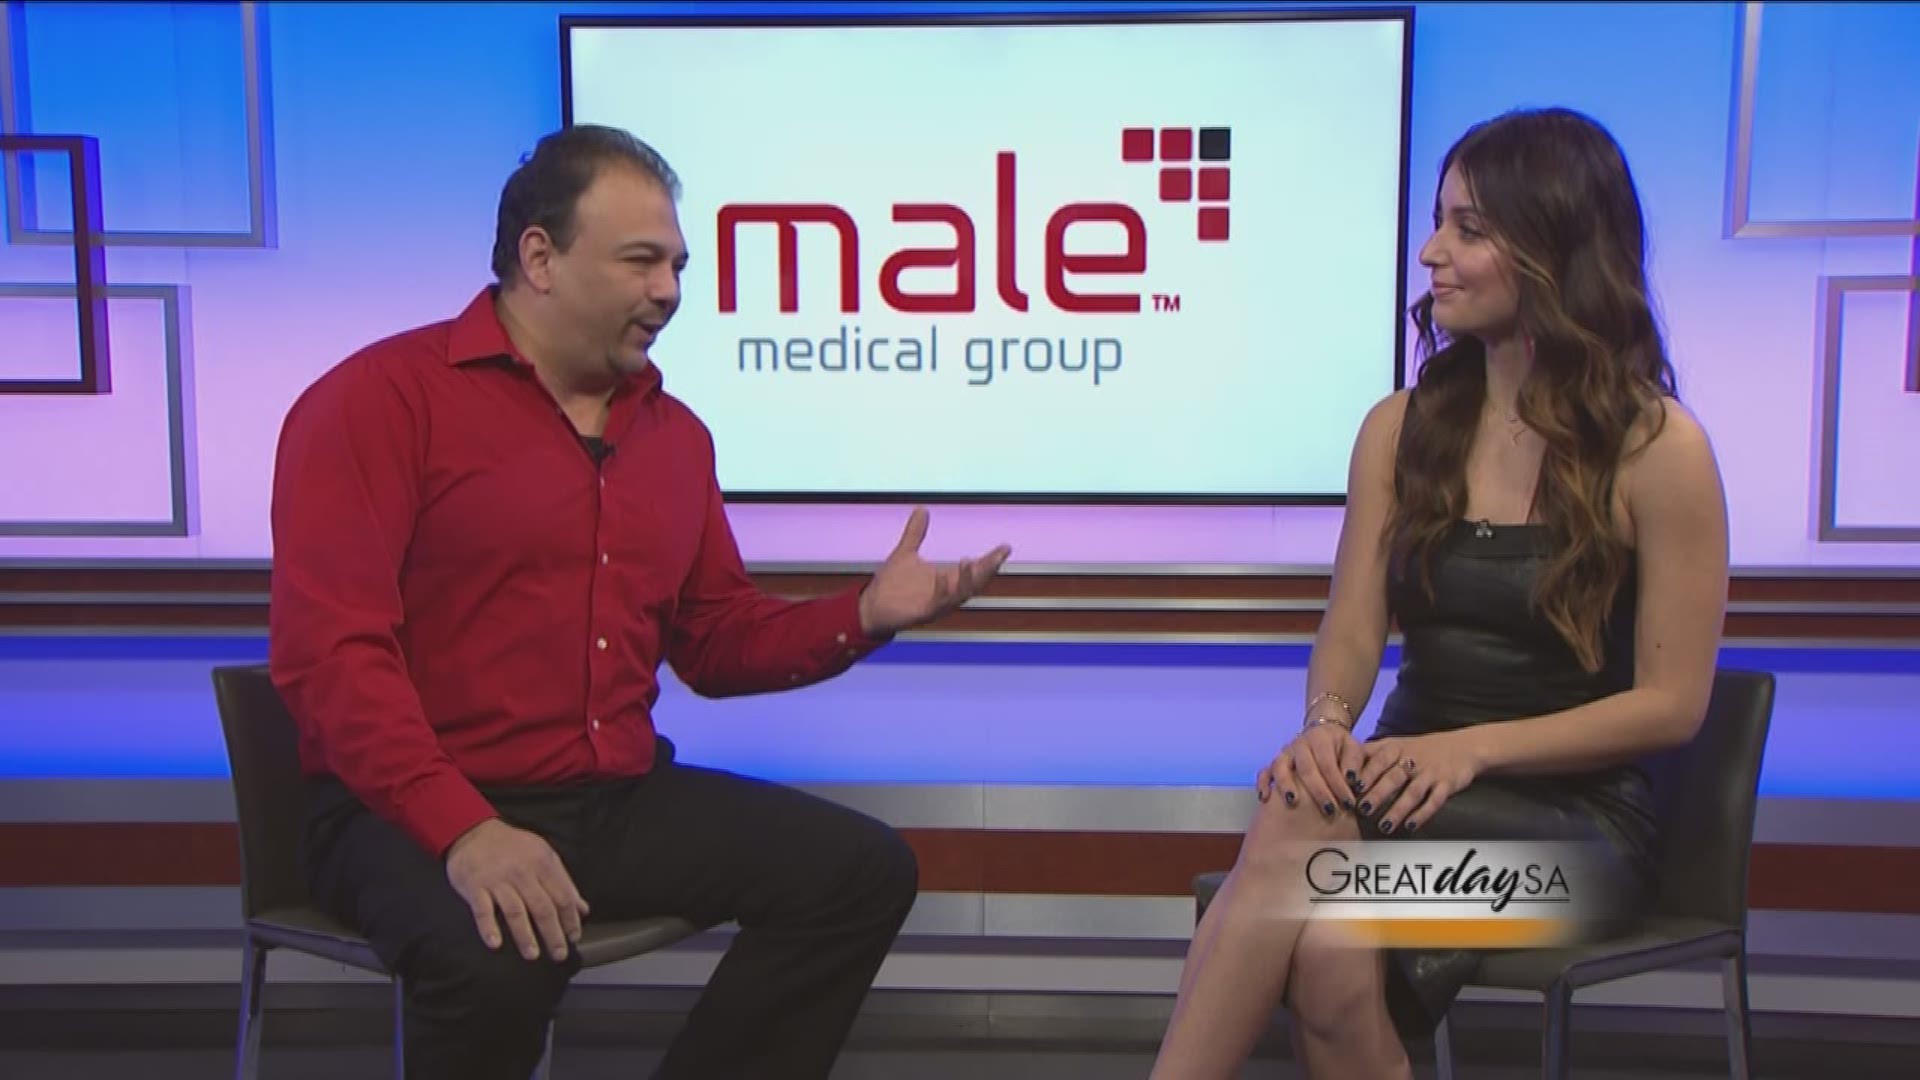 Male Medical Group